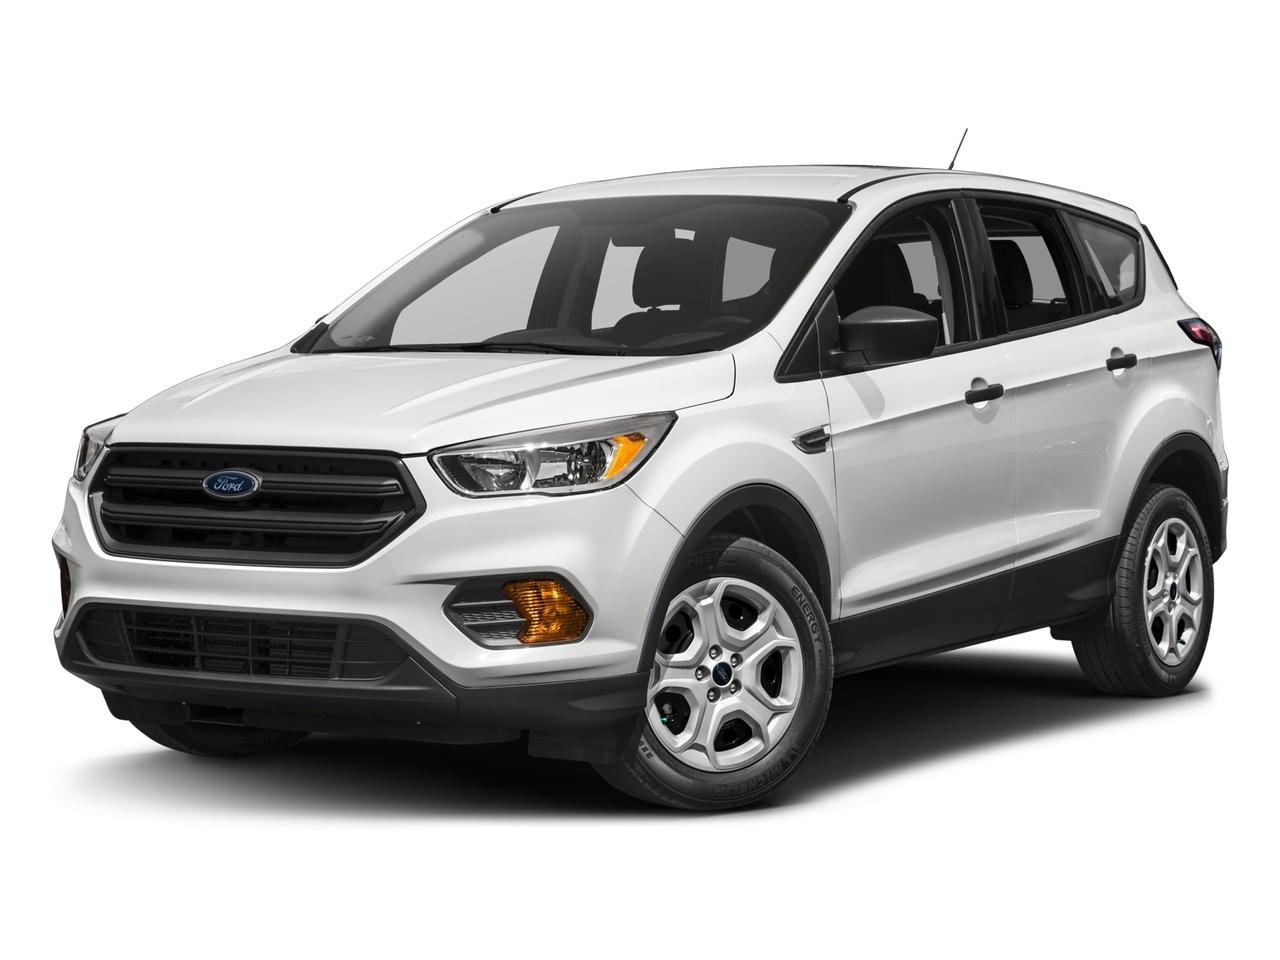 2017 Ford Escape Vehicle Photo in Plainfield, IL 60586